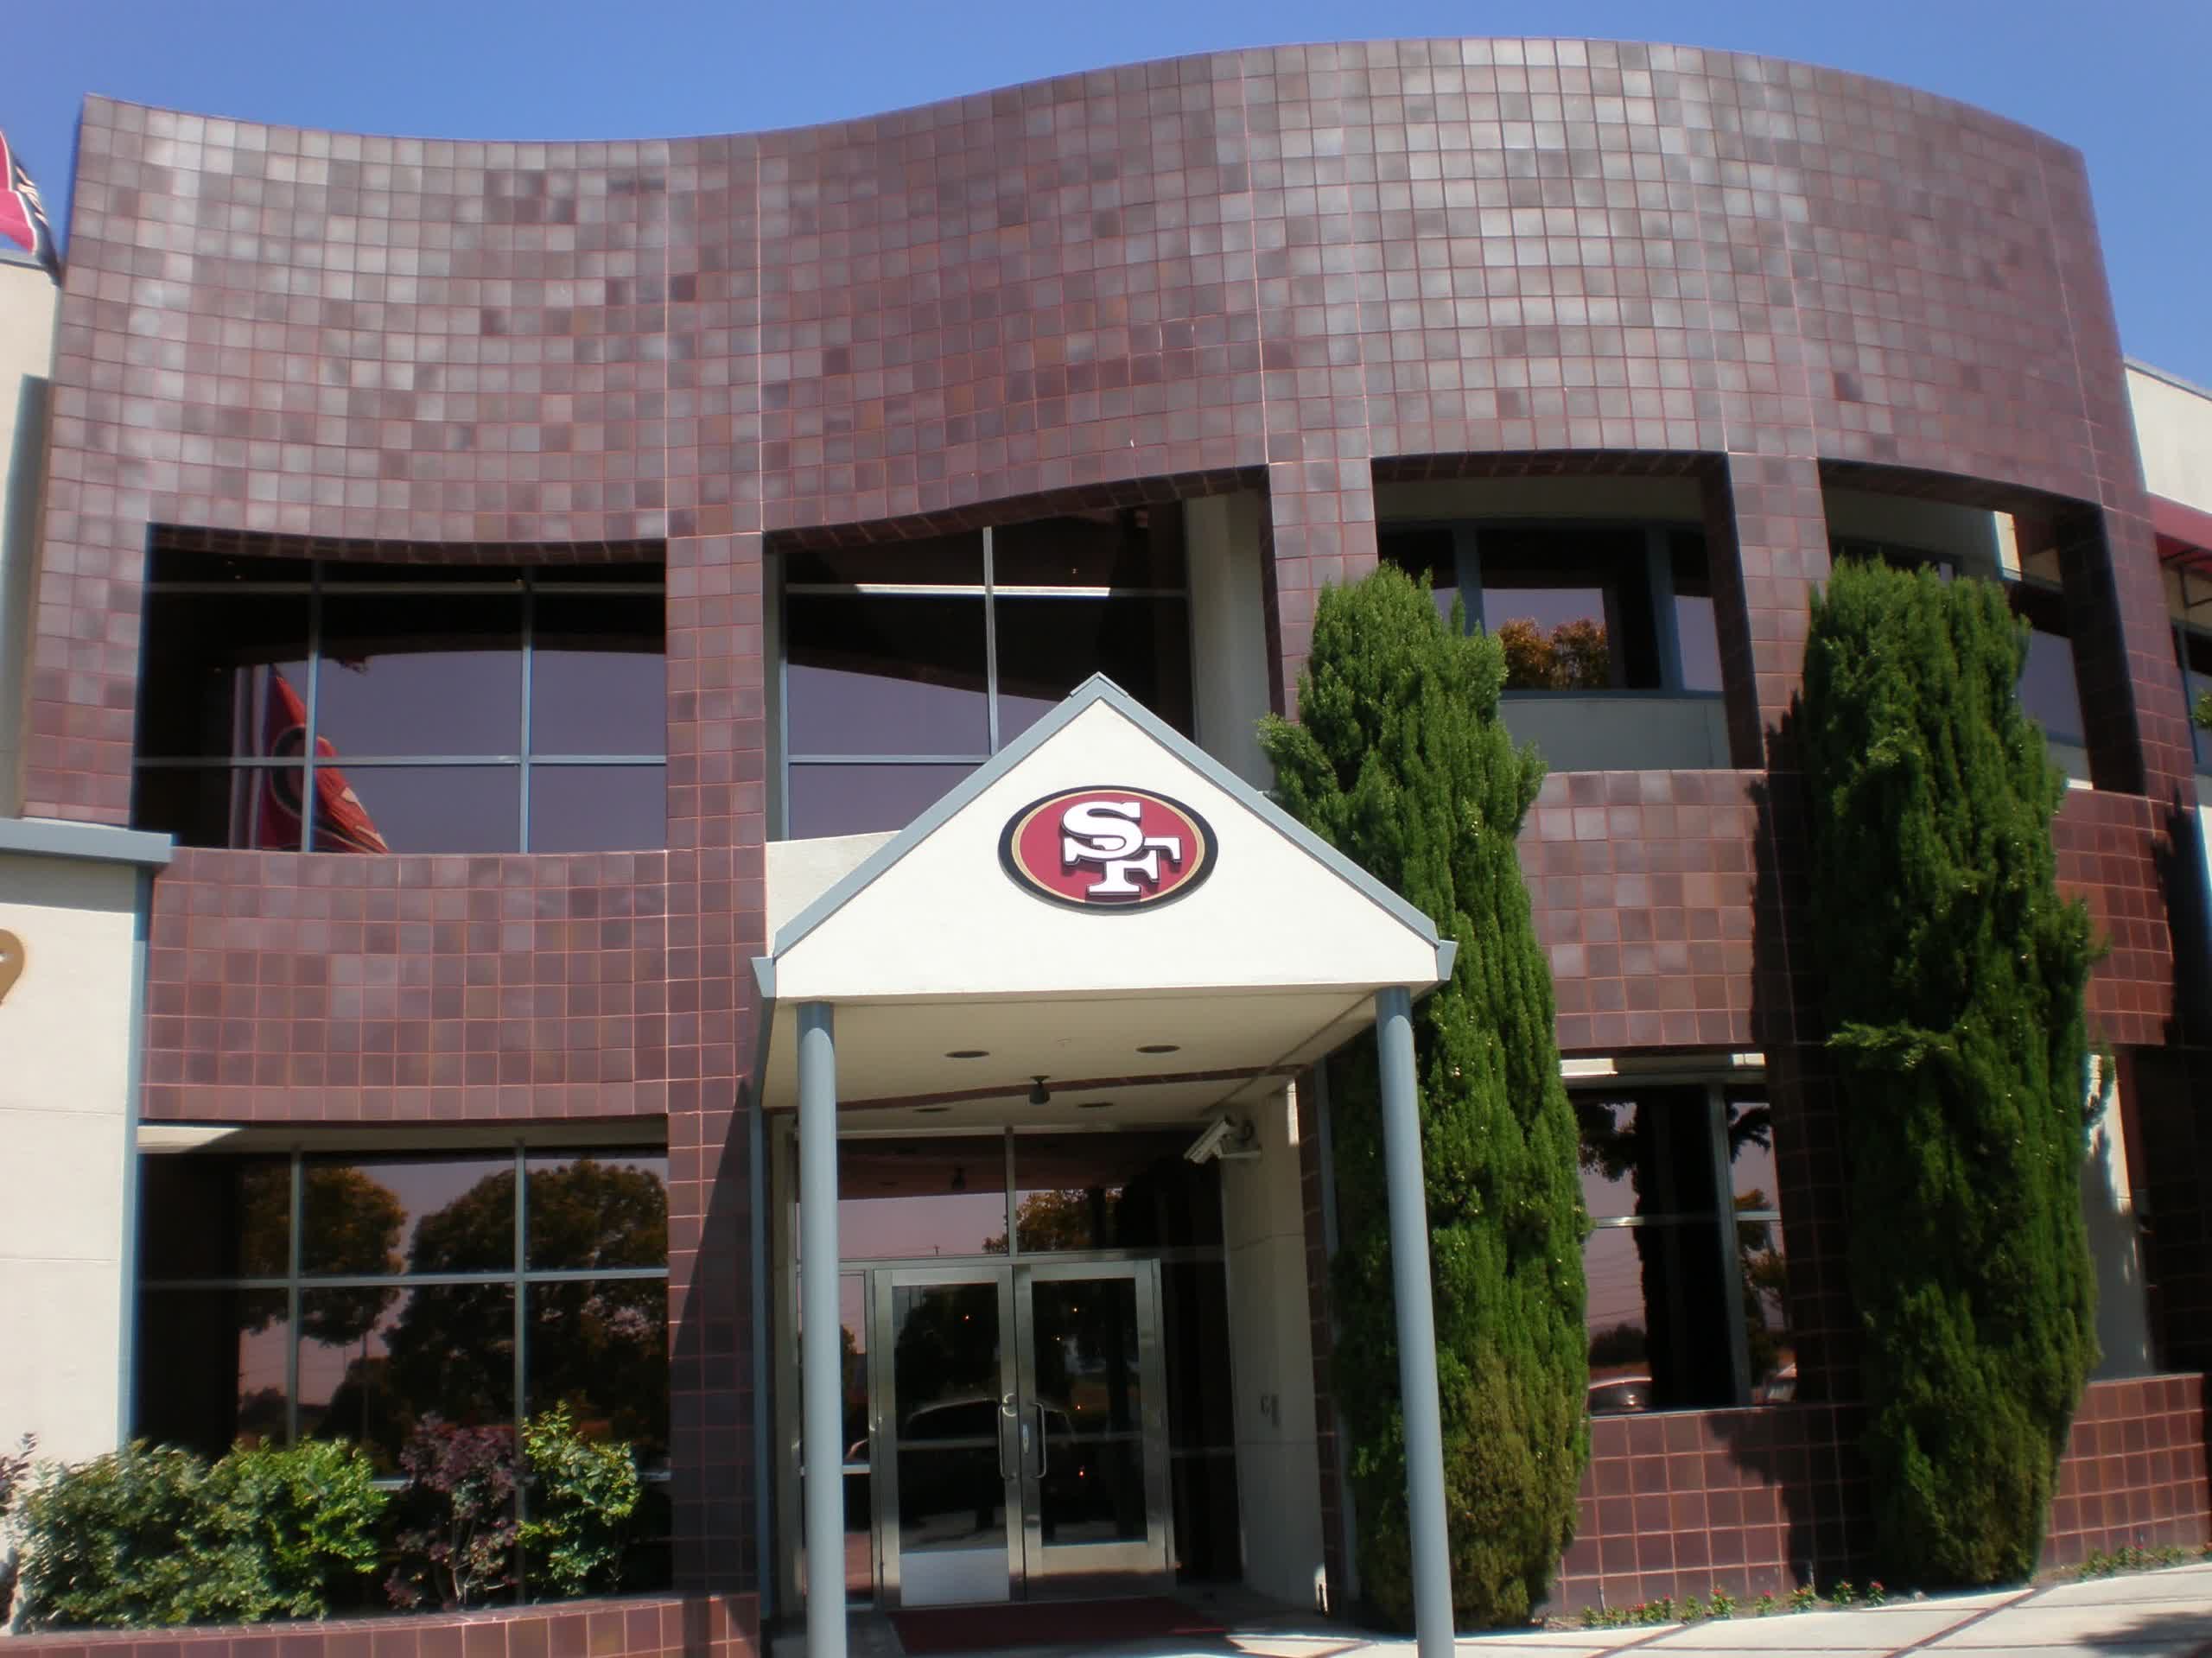 San Francisco 49ers confirms it fell victim to BlackByte ransomware on Super Bowl Sunday